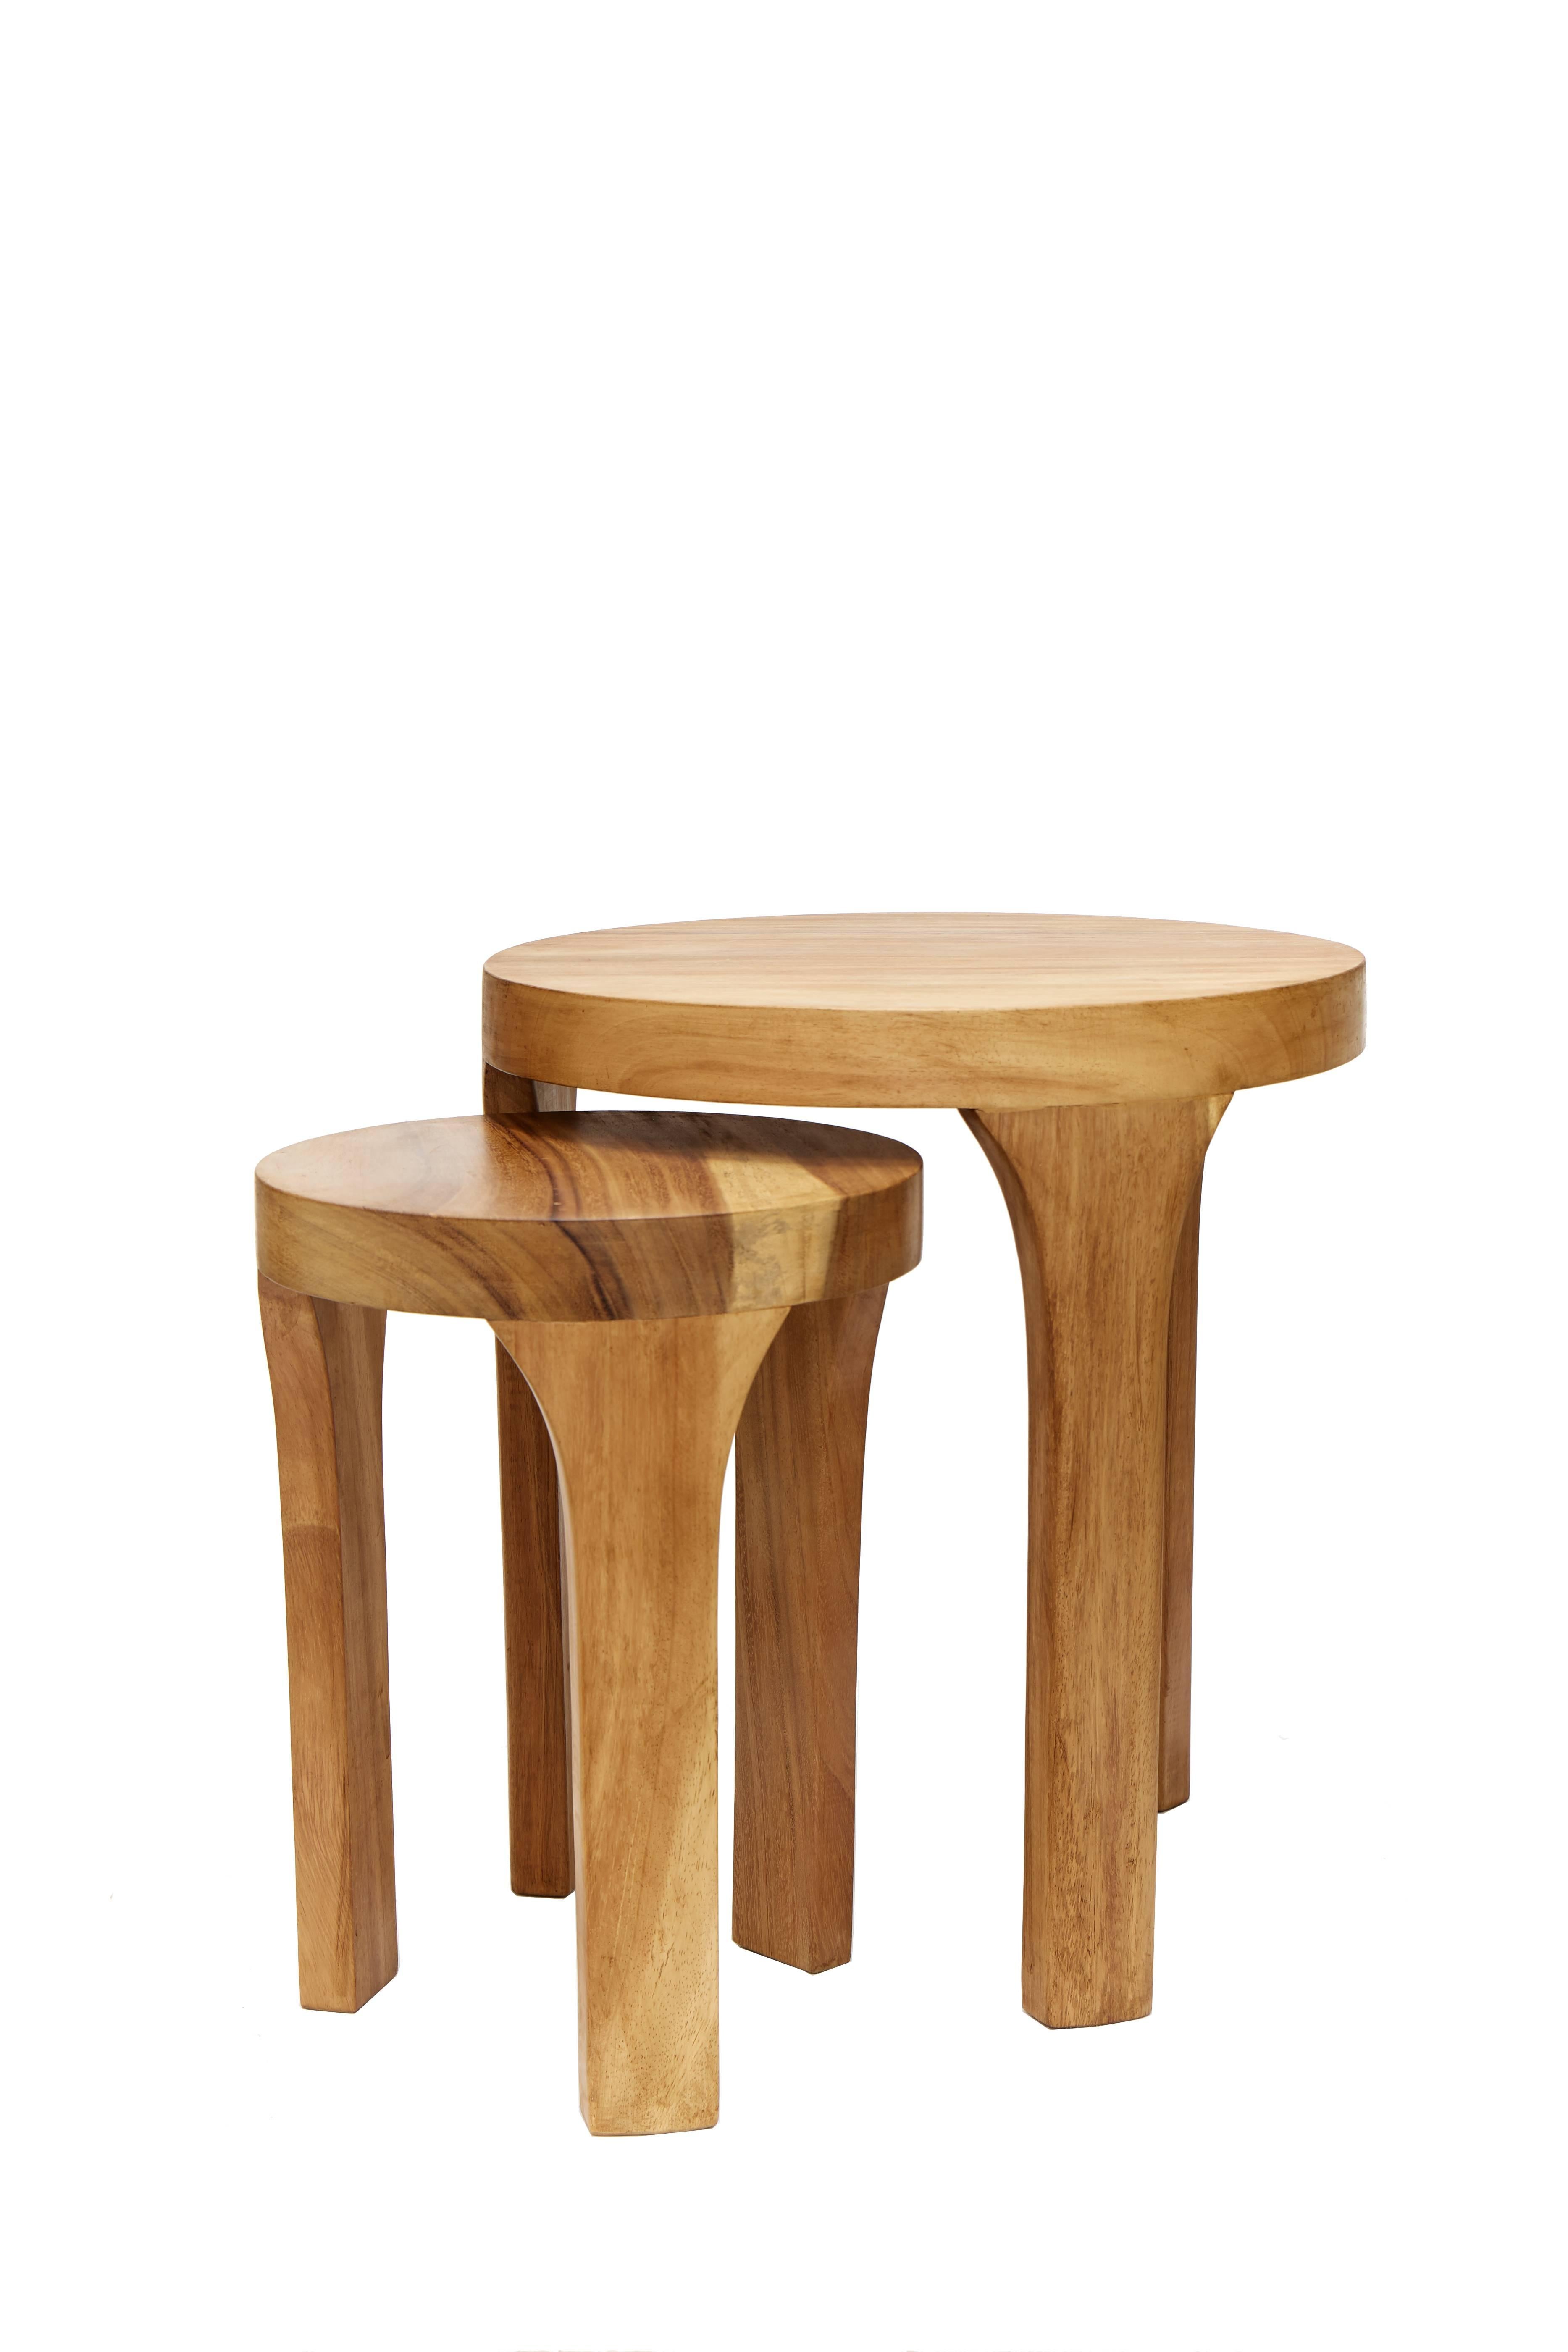 This set of two handcrafted Marcelo centre tables is a unique creation by Leon Design from Mexico City. Both are made of solid tropical Parota wood and hand-carved.

Dimensions :
Big table: diameter 50 cm / height 55 cm
Little table: diameter 35